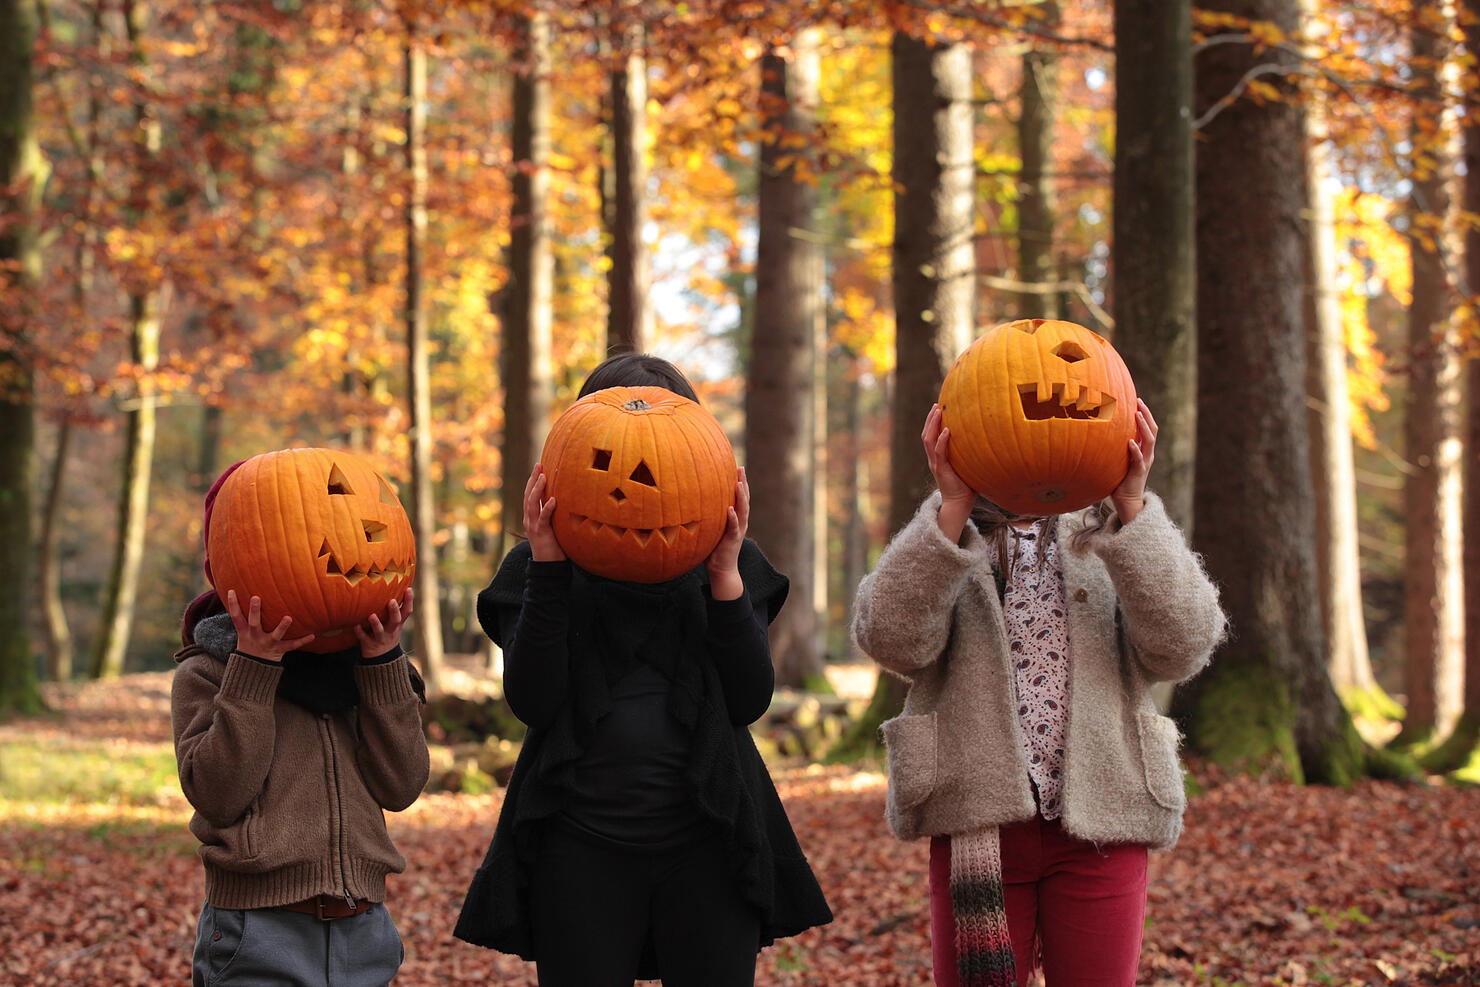 Children covering their faces with carved pumpkins.